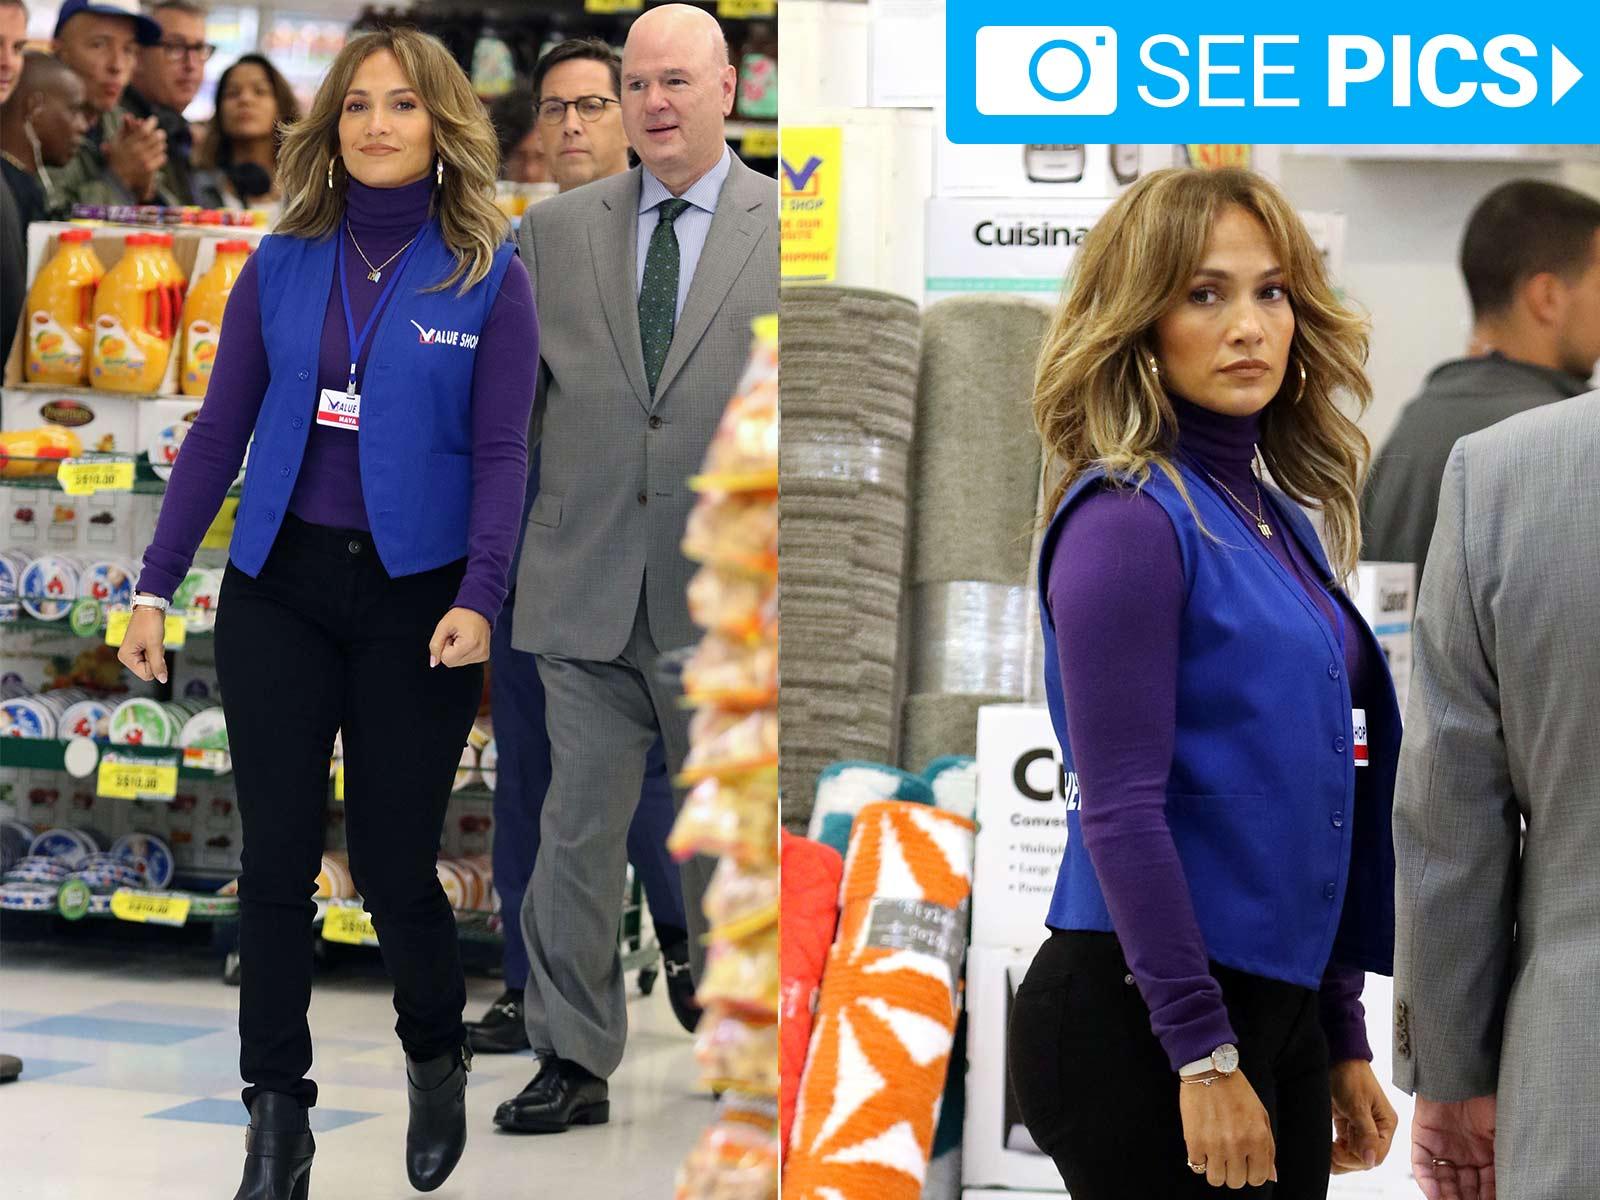 JLo is Jenny From the ‘Value Shop’